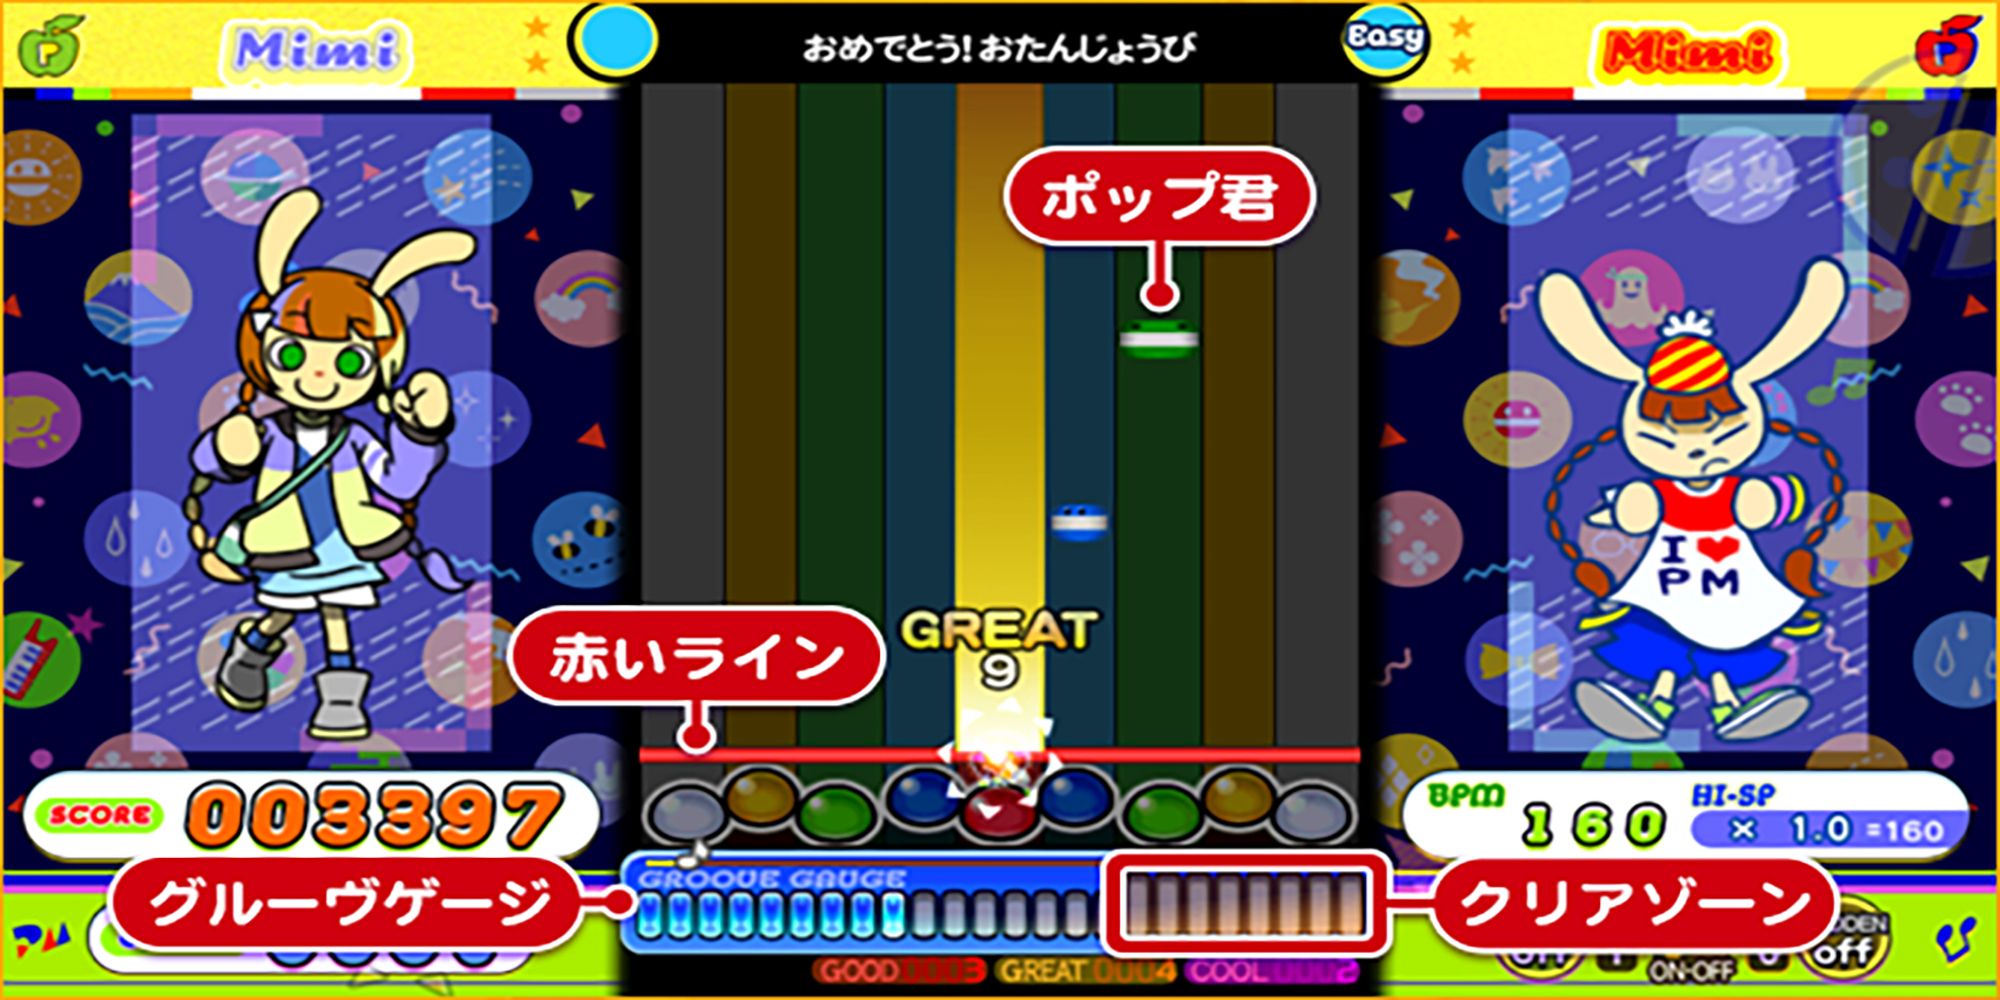 Two versions of Mimi face off in a tutorial for Pop 'n Music Lively.